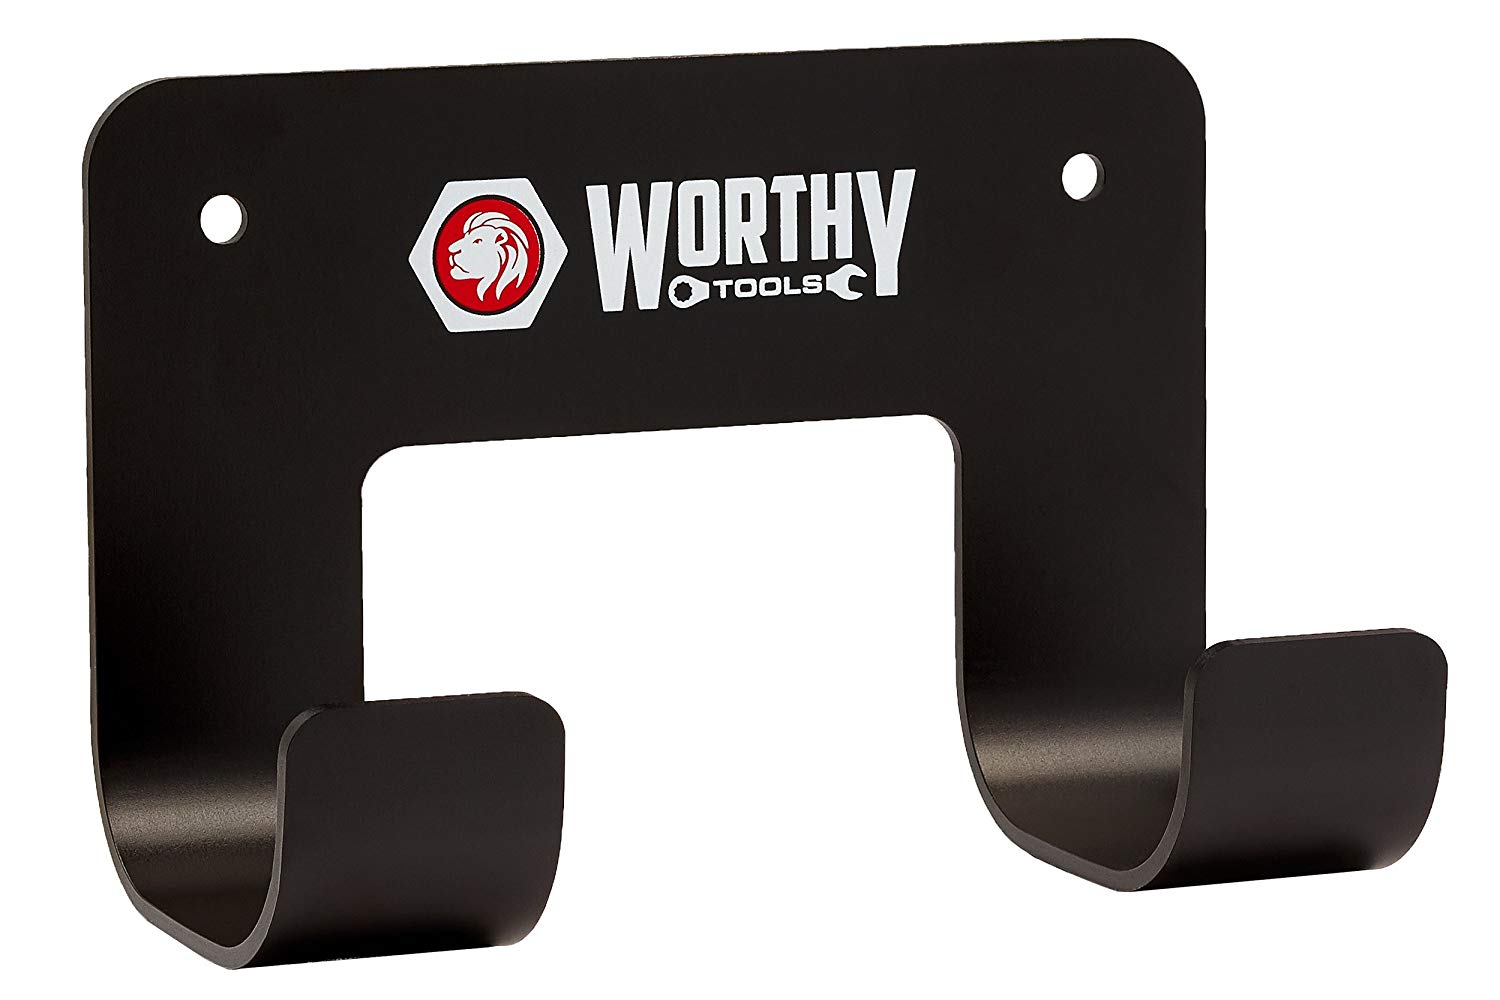 Heavy Duty Power Tool Utility Hook, Hanger, Cordless Drill Impact Holder, Wall Mounted Organizer, By Worthy Tools (2 Pack, Red and White Logo)